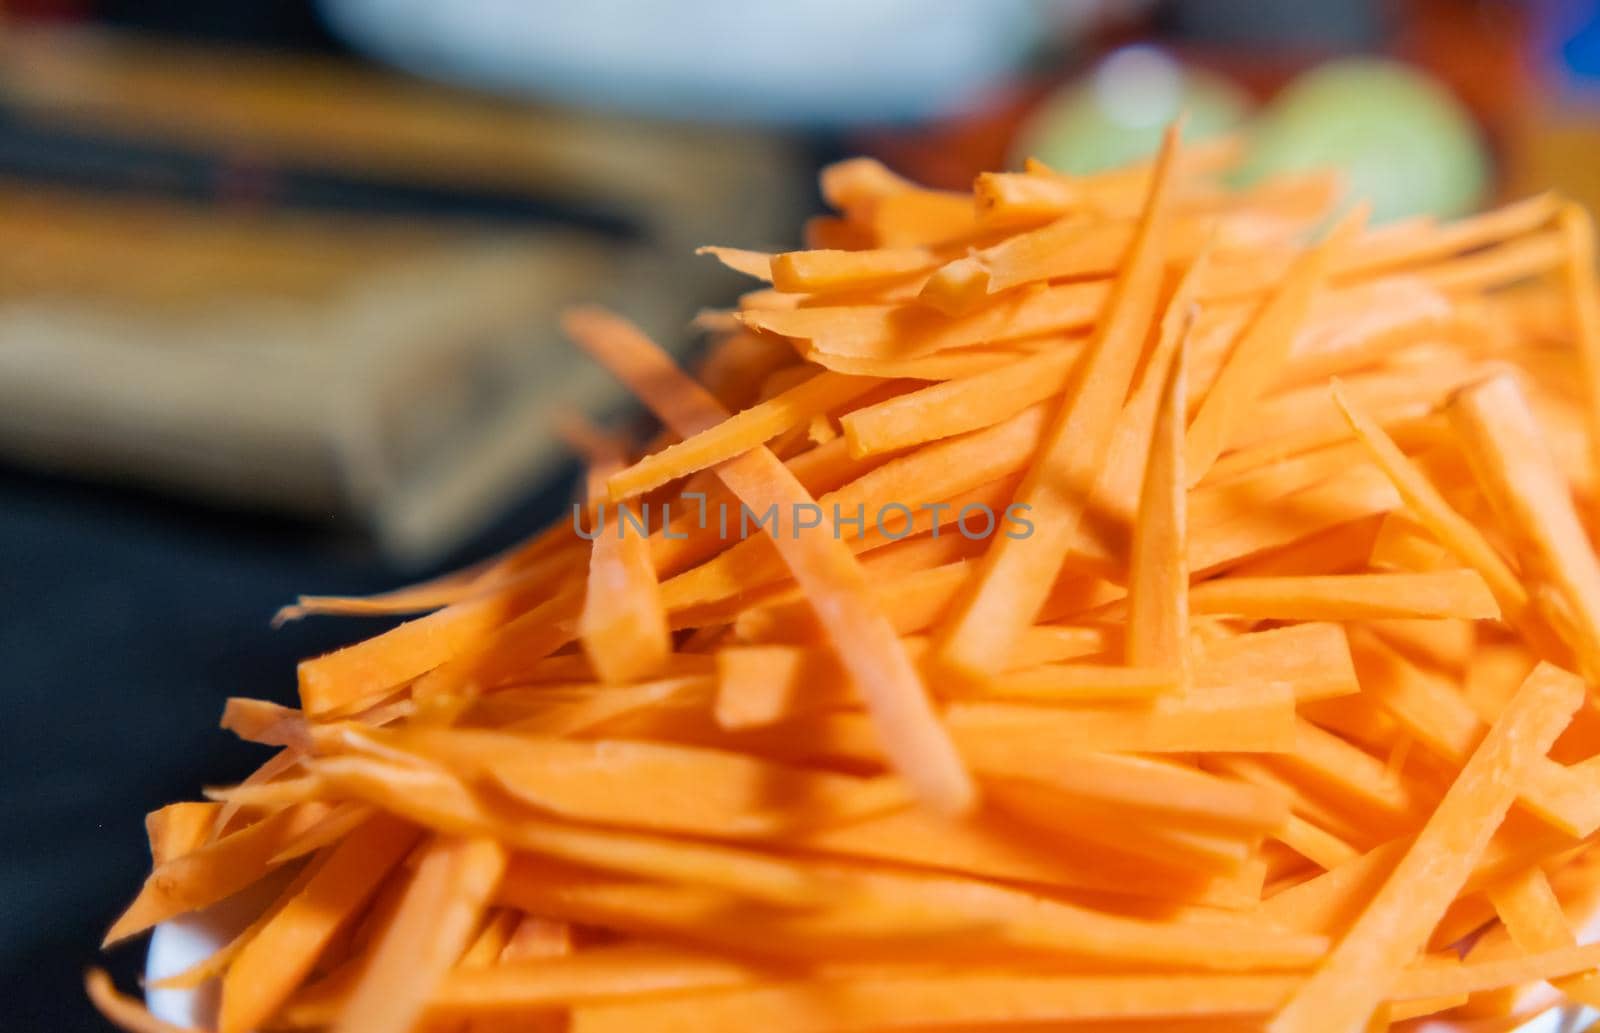 Close-up of small pile of thin carrot slices on white plate with blurry background. Tasty and fresh shredded carrot above porcelain plate. Healthy food preparation